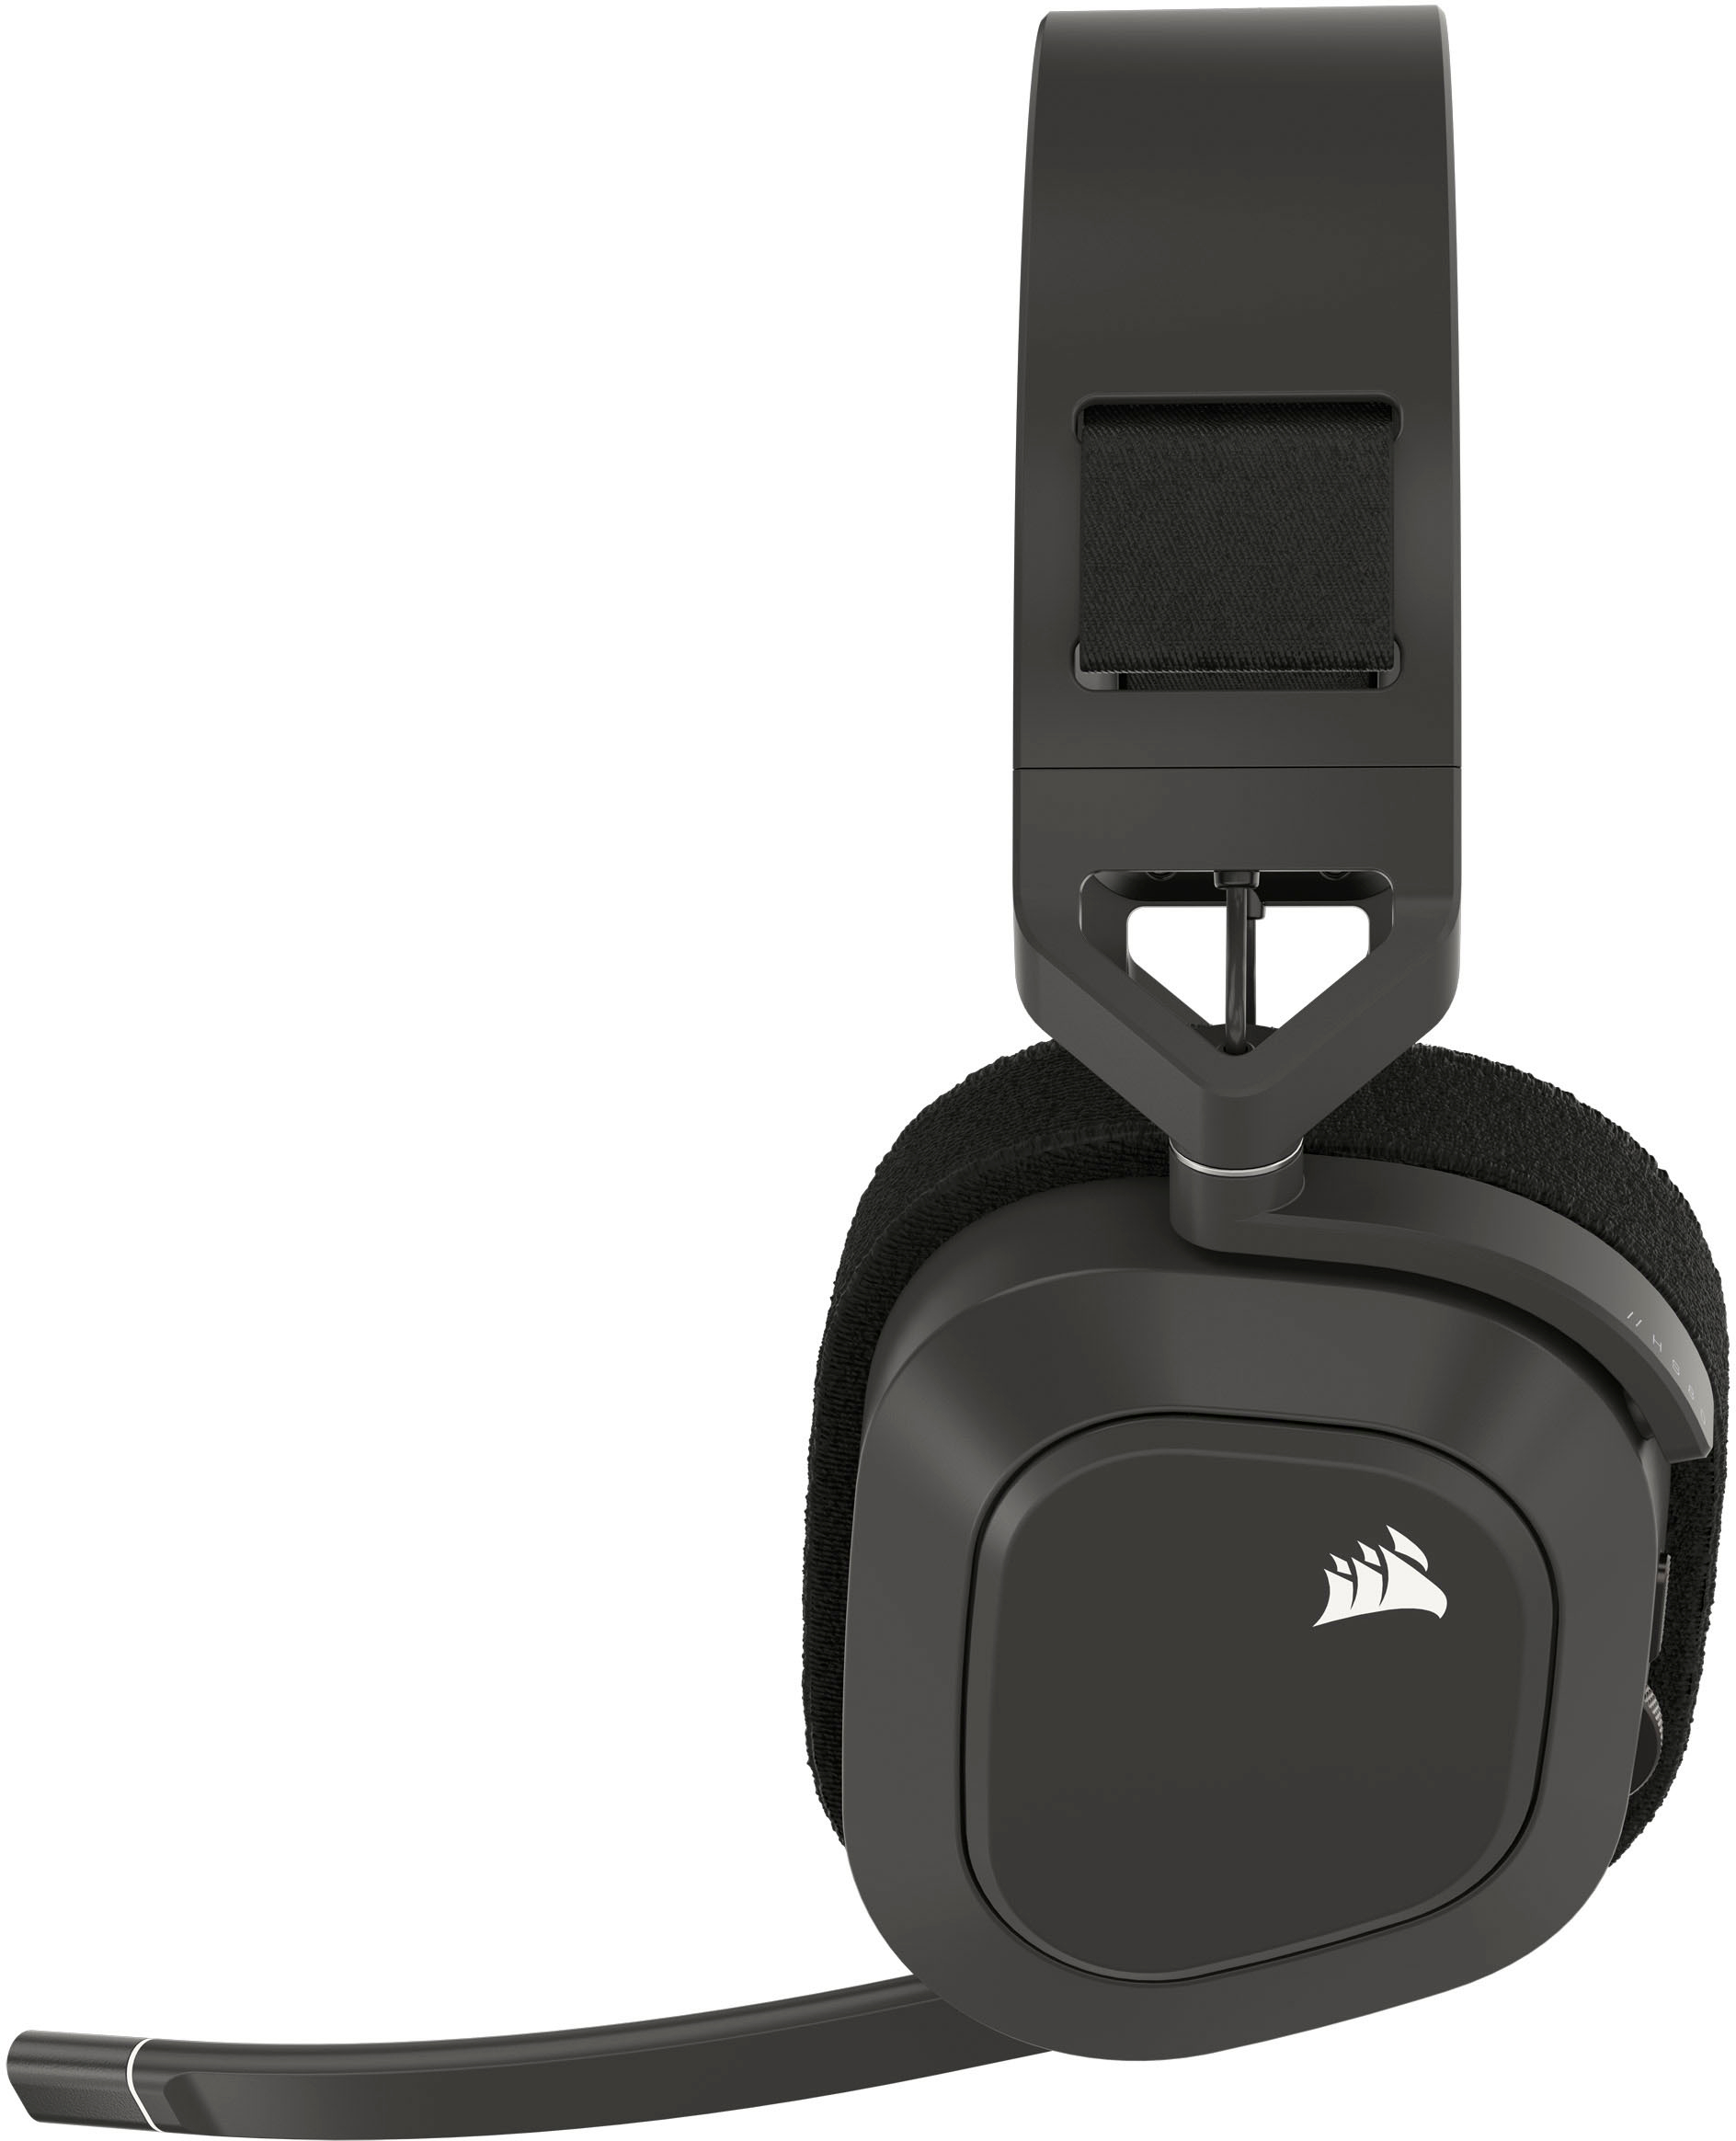 Corsair HS80 RGB Wireless Premium Gaming On Ear Headset with Dolby